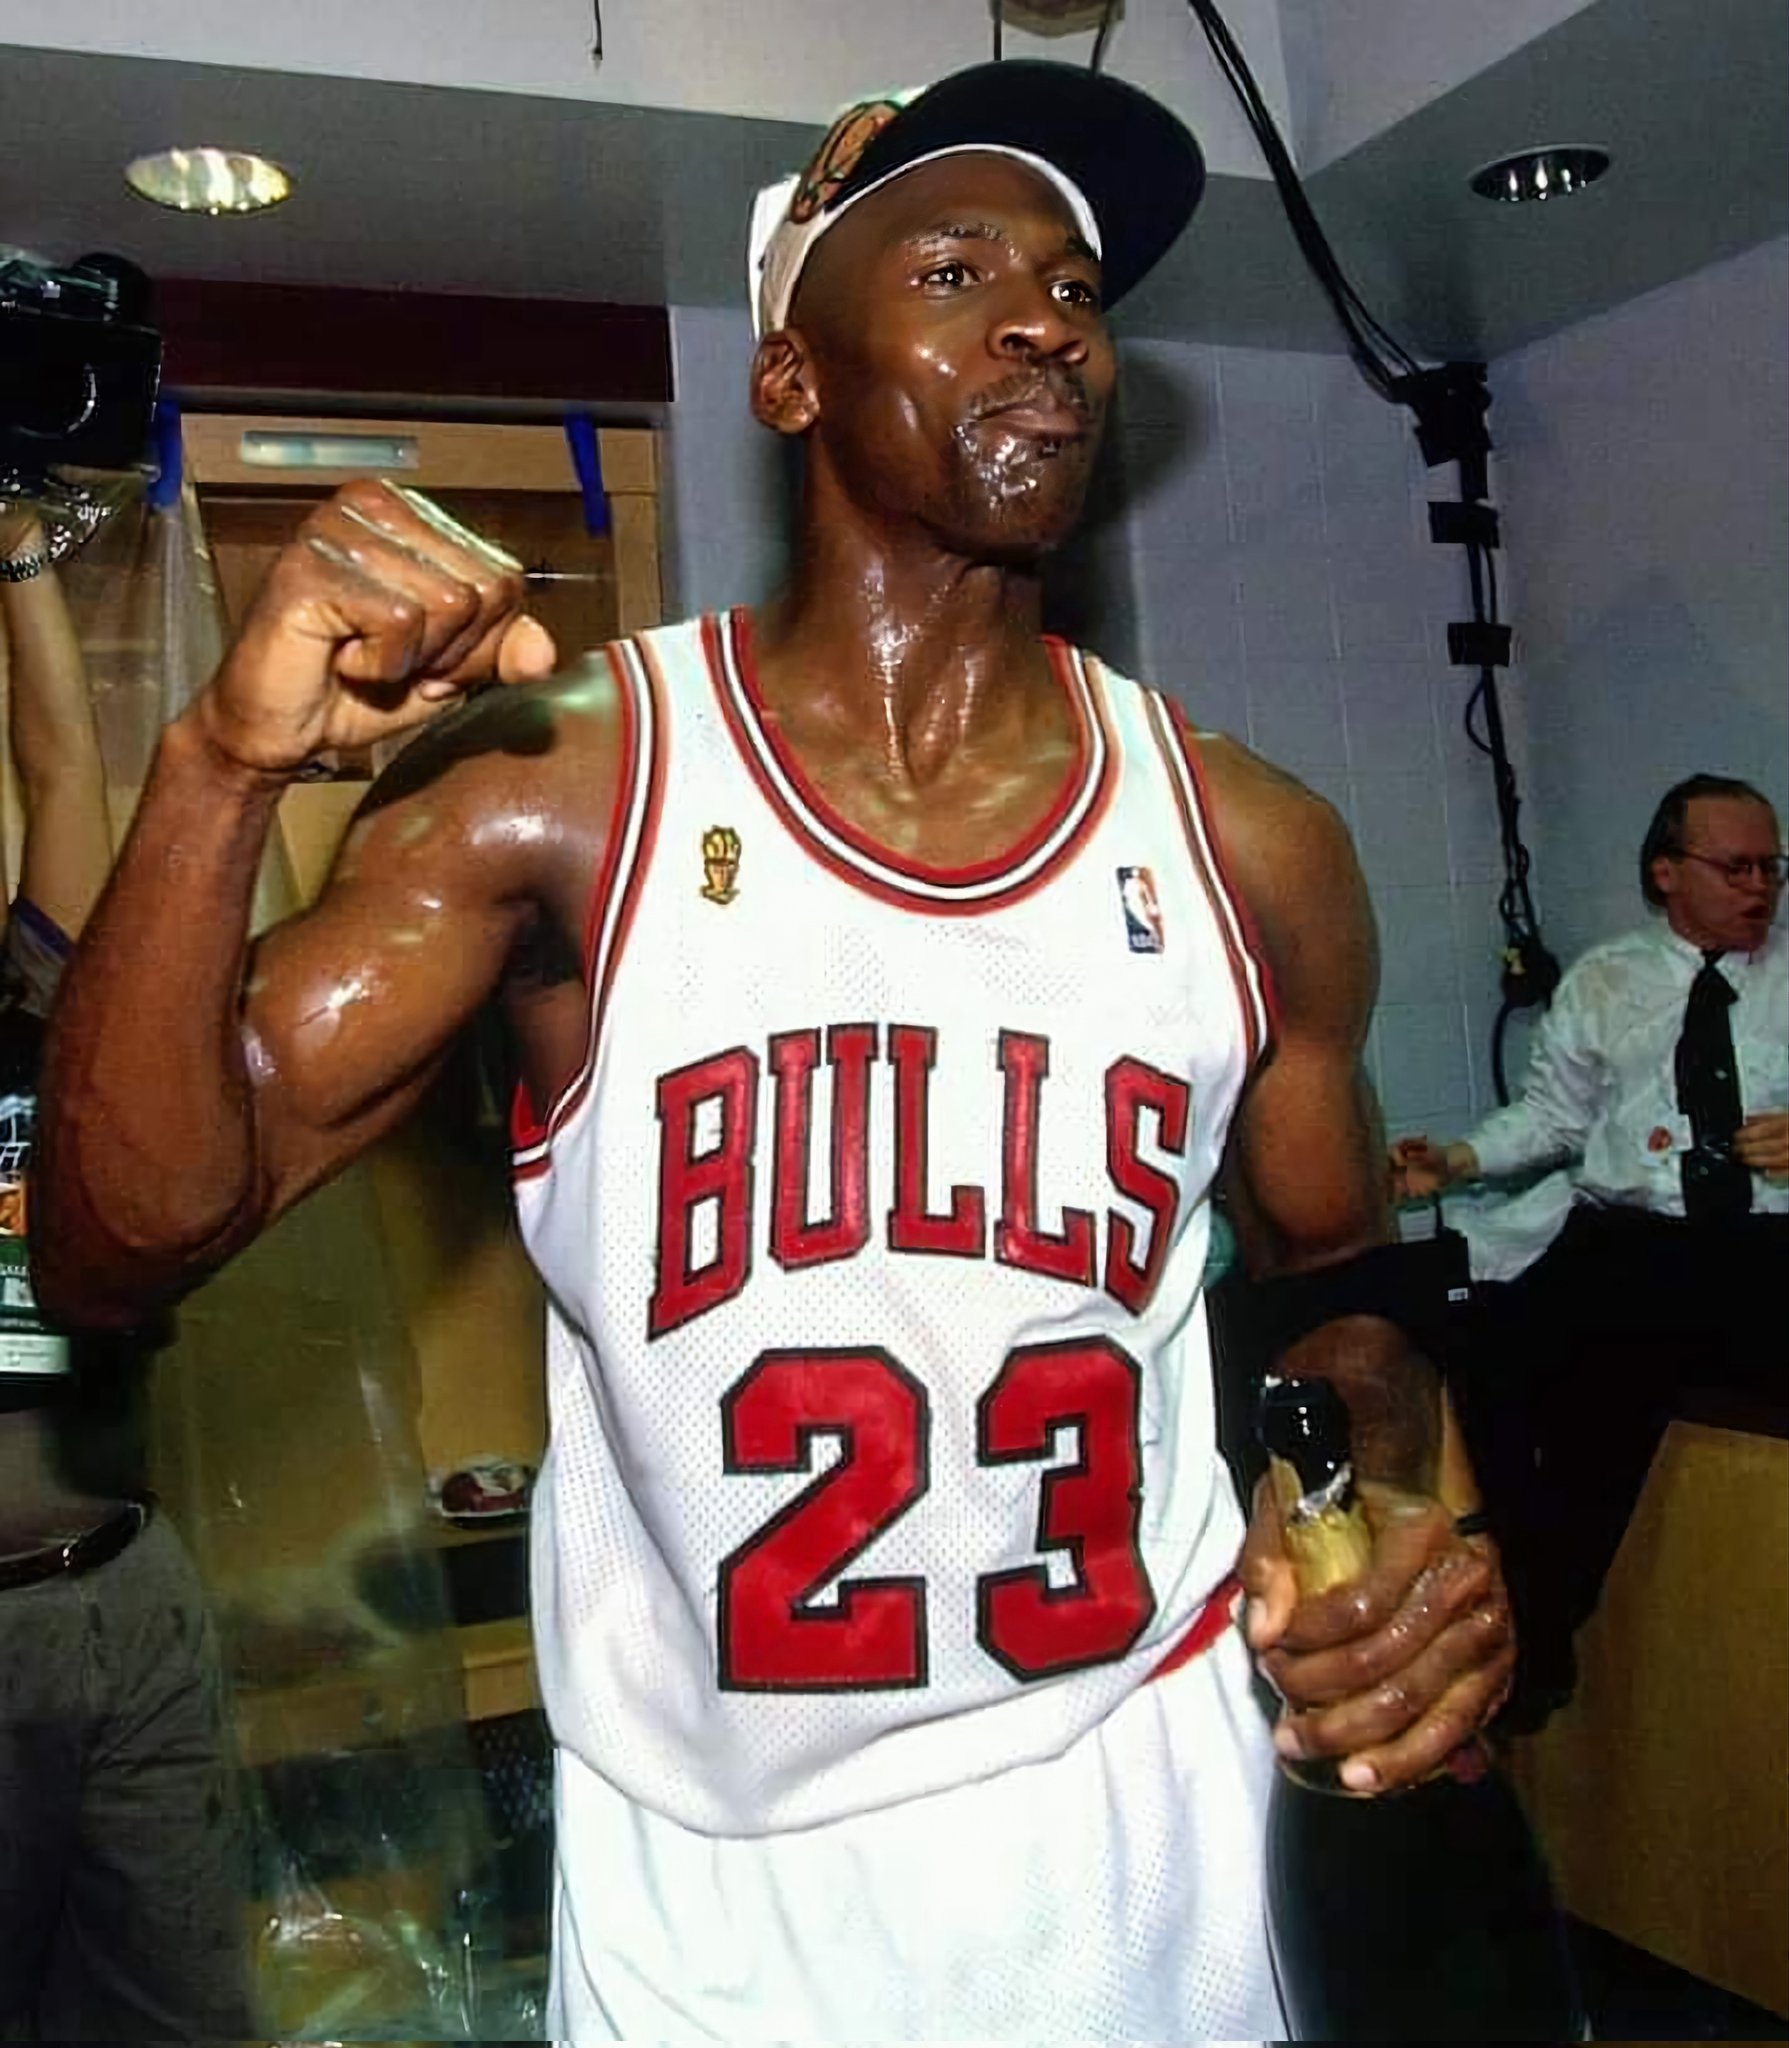 The Chicago Bulls will induct Michael Jordan, Scottie Pippen, and Dennis Rodman into the inaugural Ring of Honor